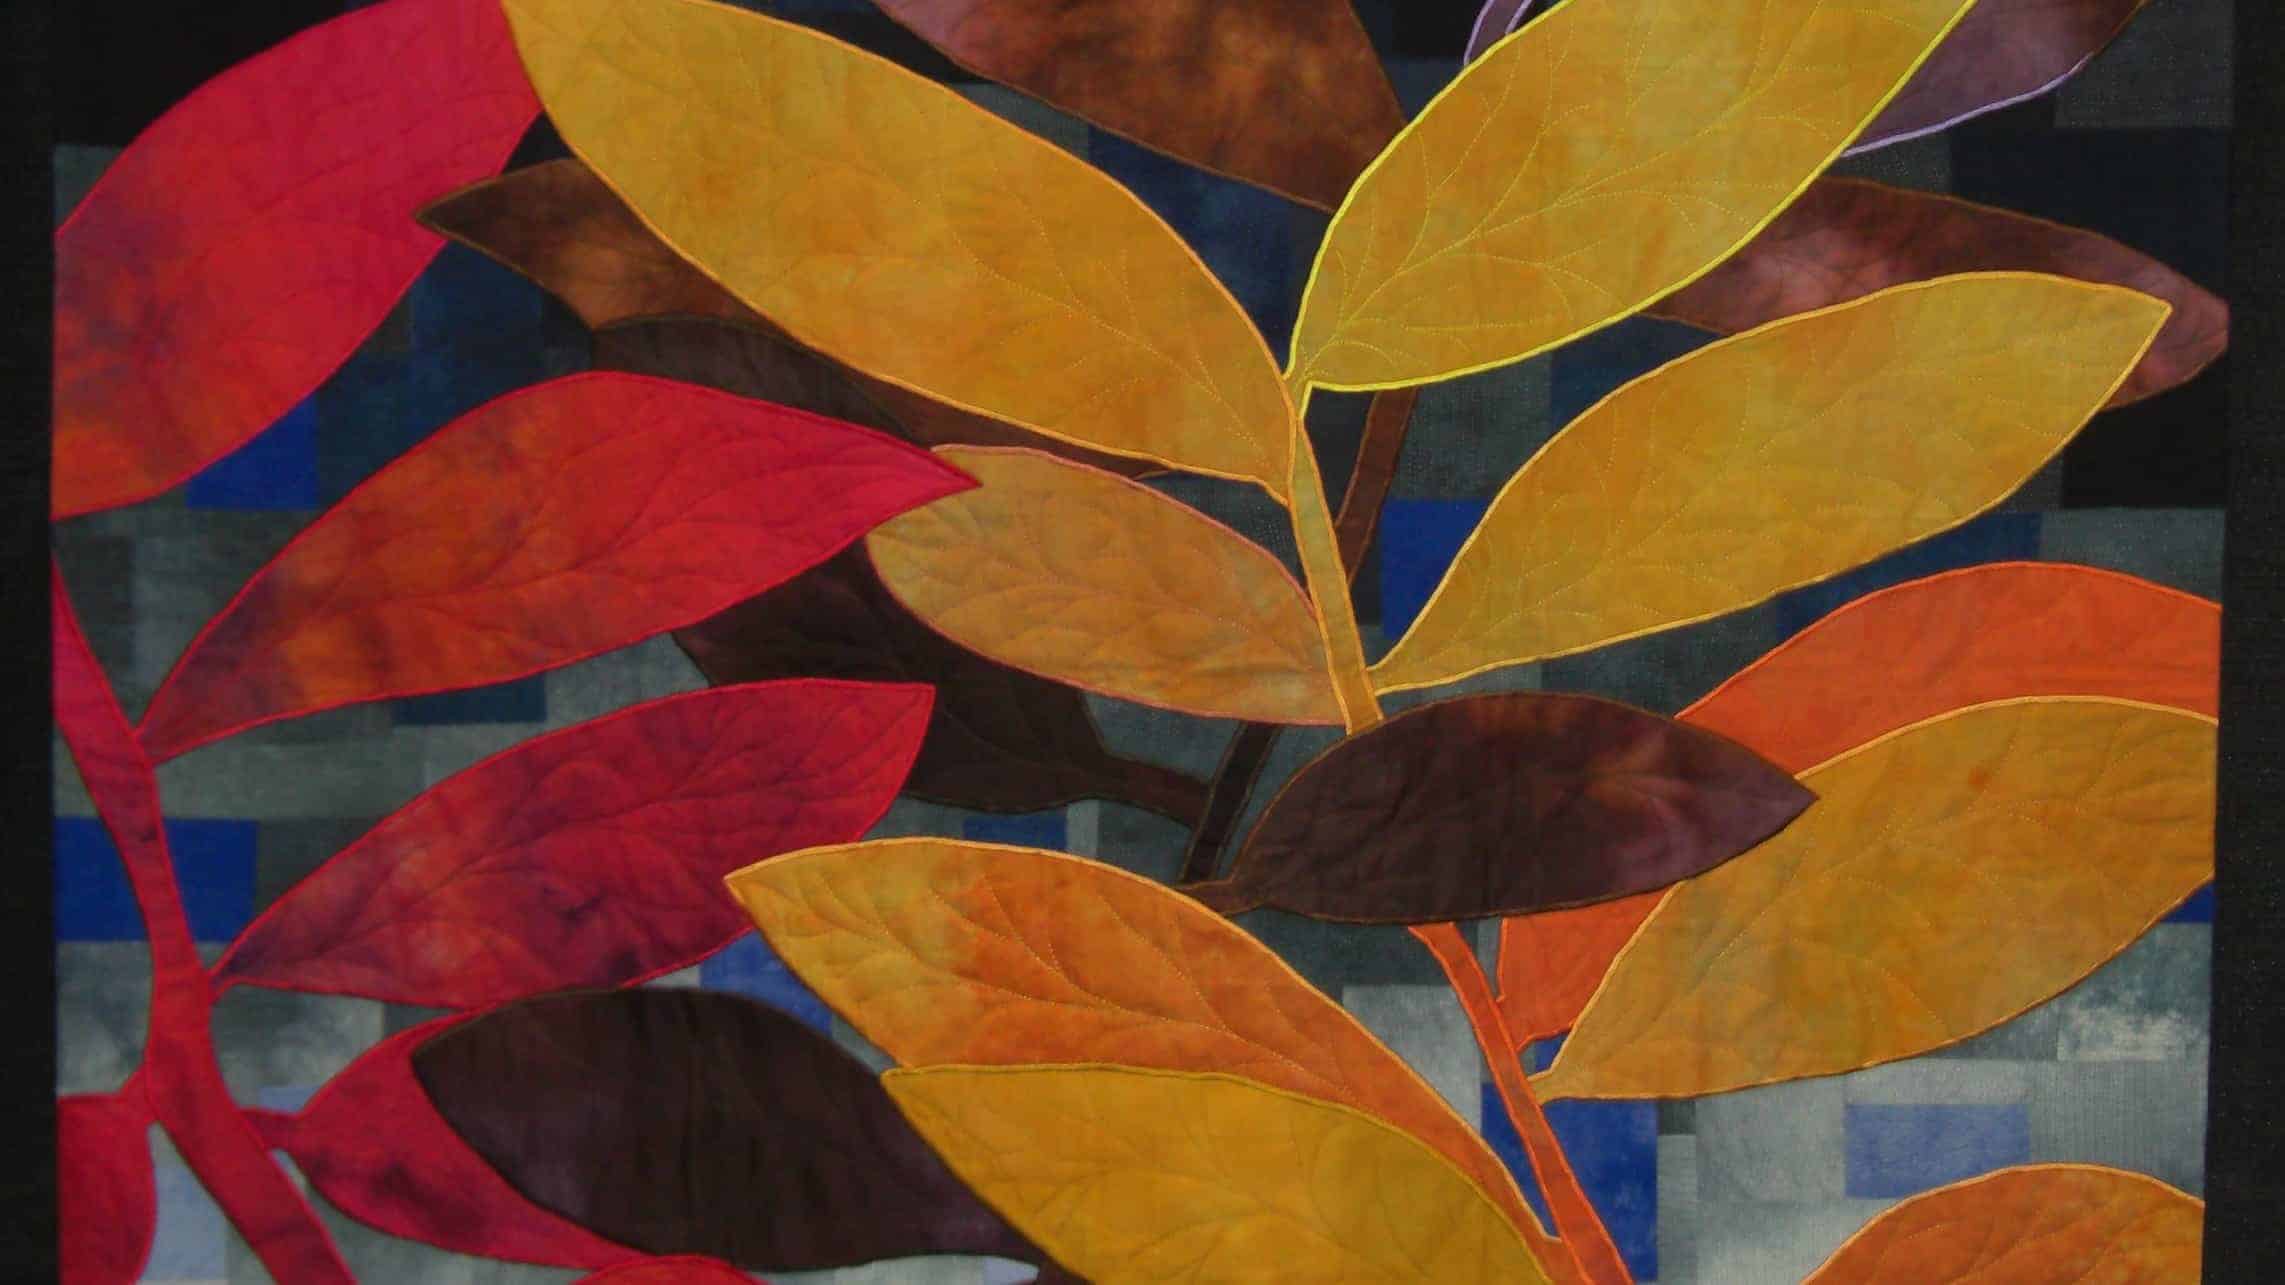 A quilt flames in autumn colors at the Mid Atlantic Quilt Festival.